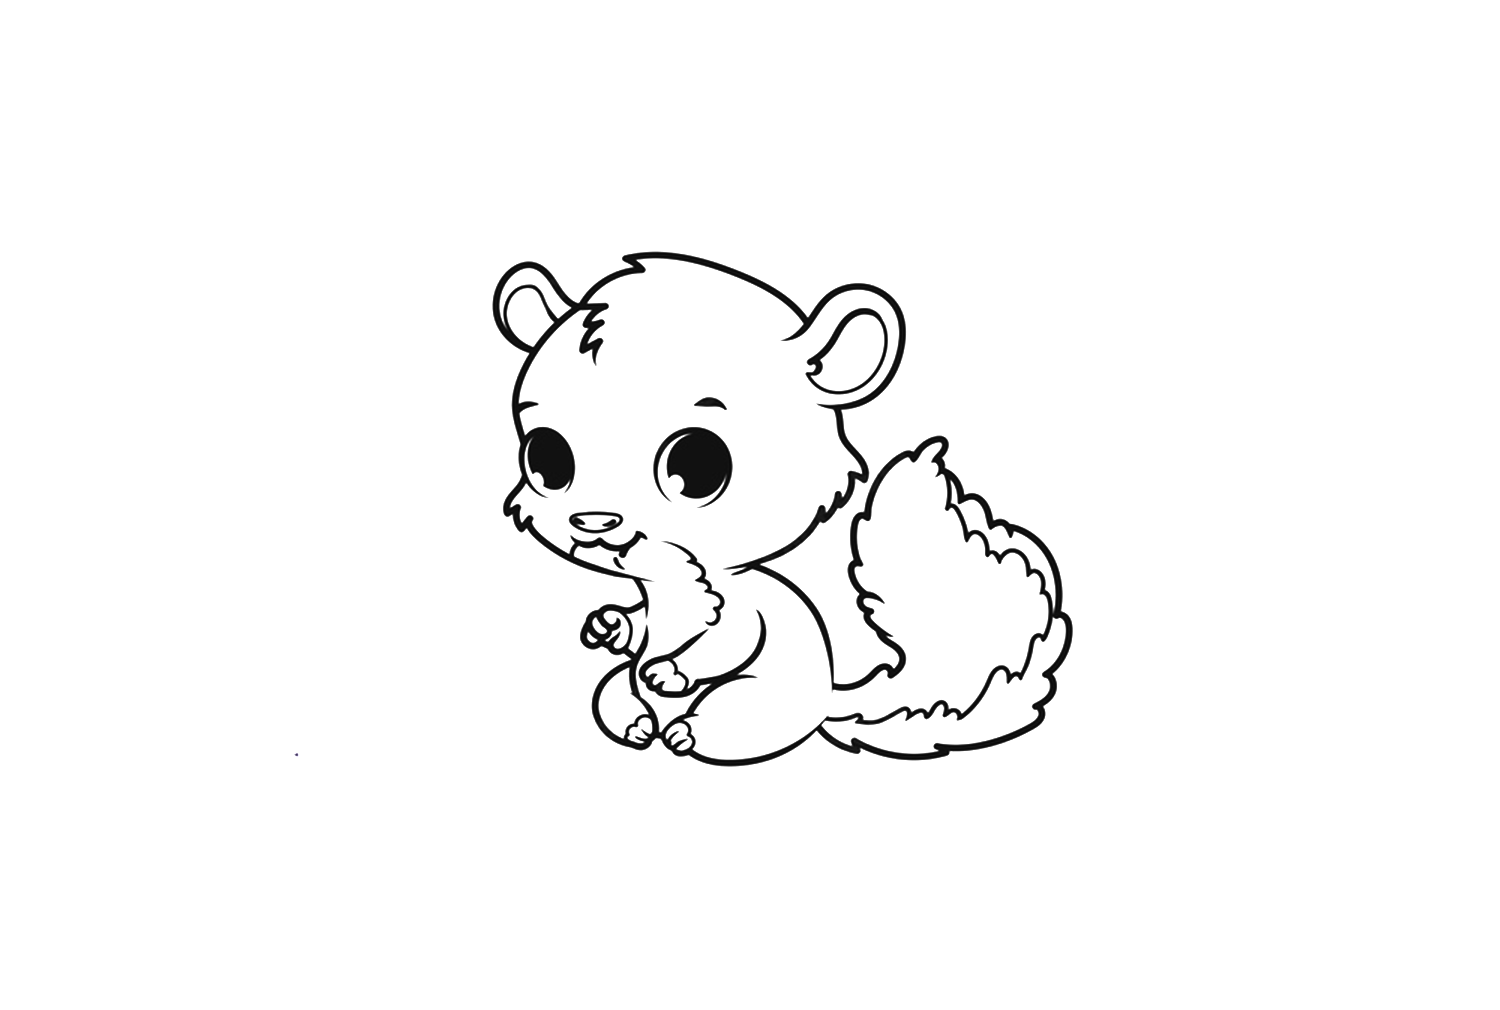 Chinchilla Cartoon Character Coloring Page - Free Printable Coloring Pages